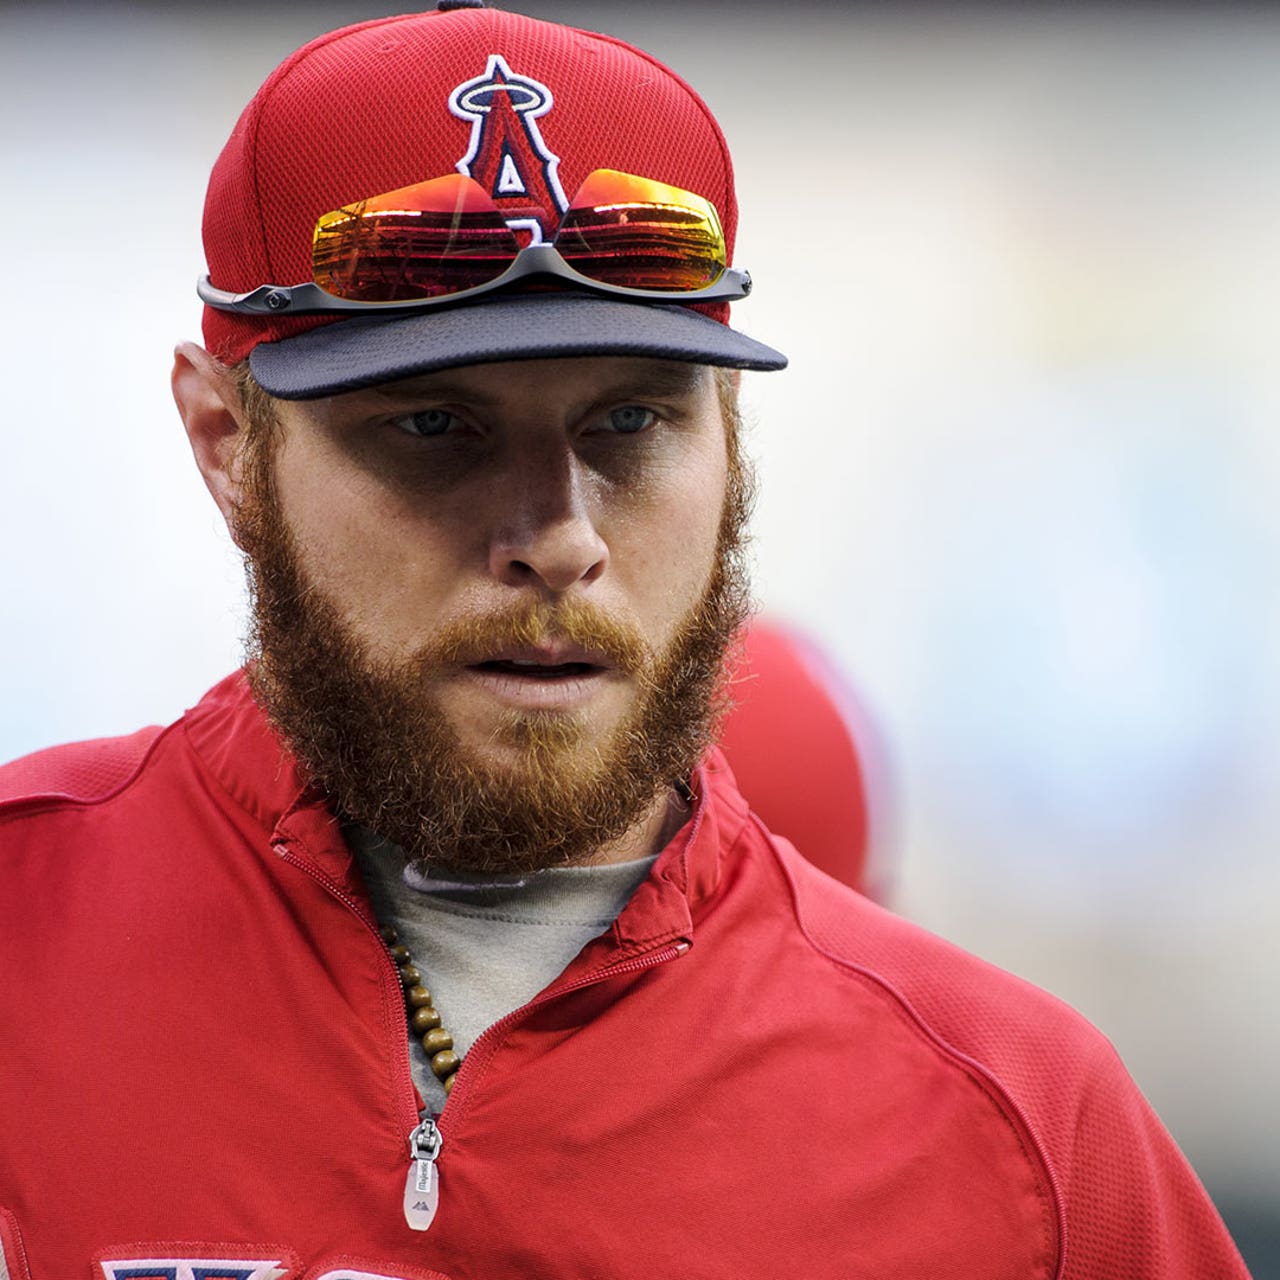 MLB's decision on Josh Hamilton could come as early as next week